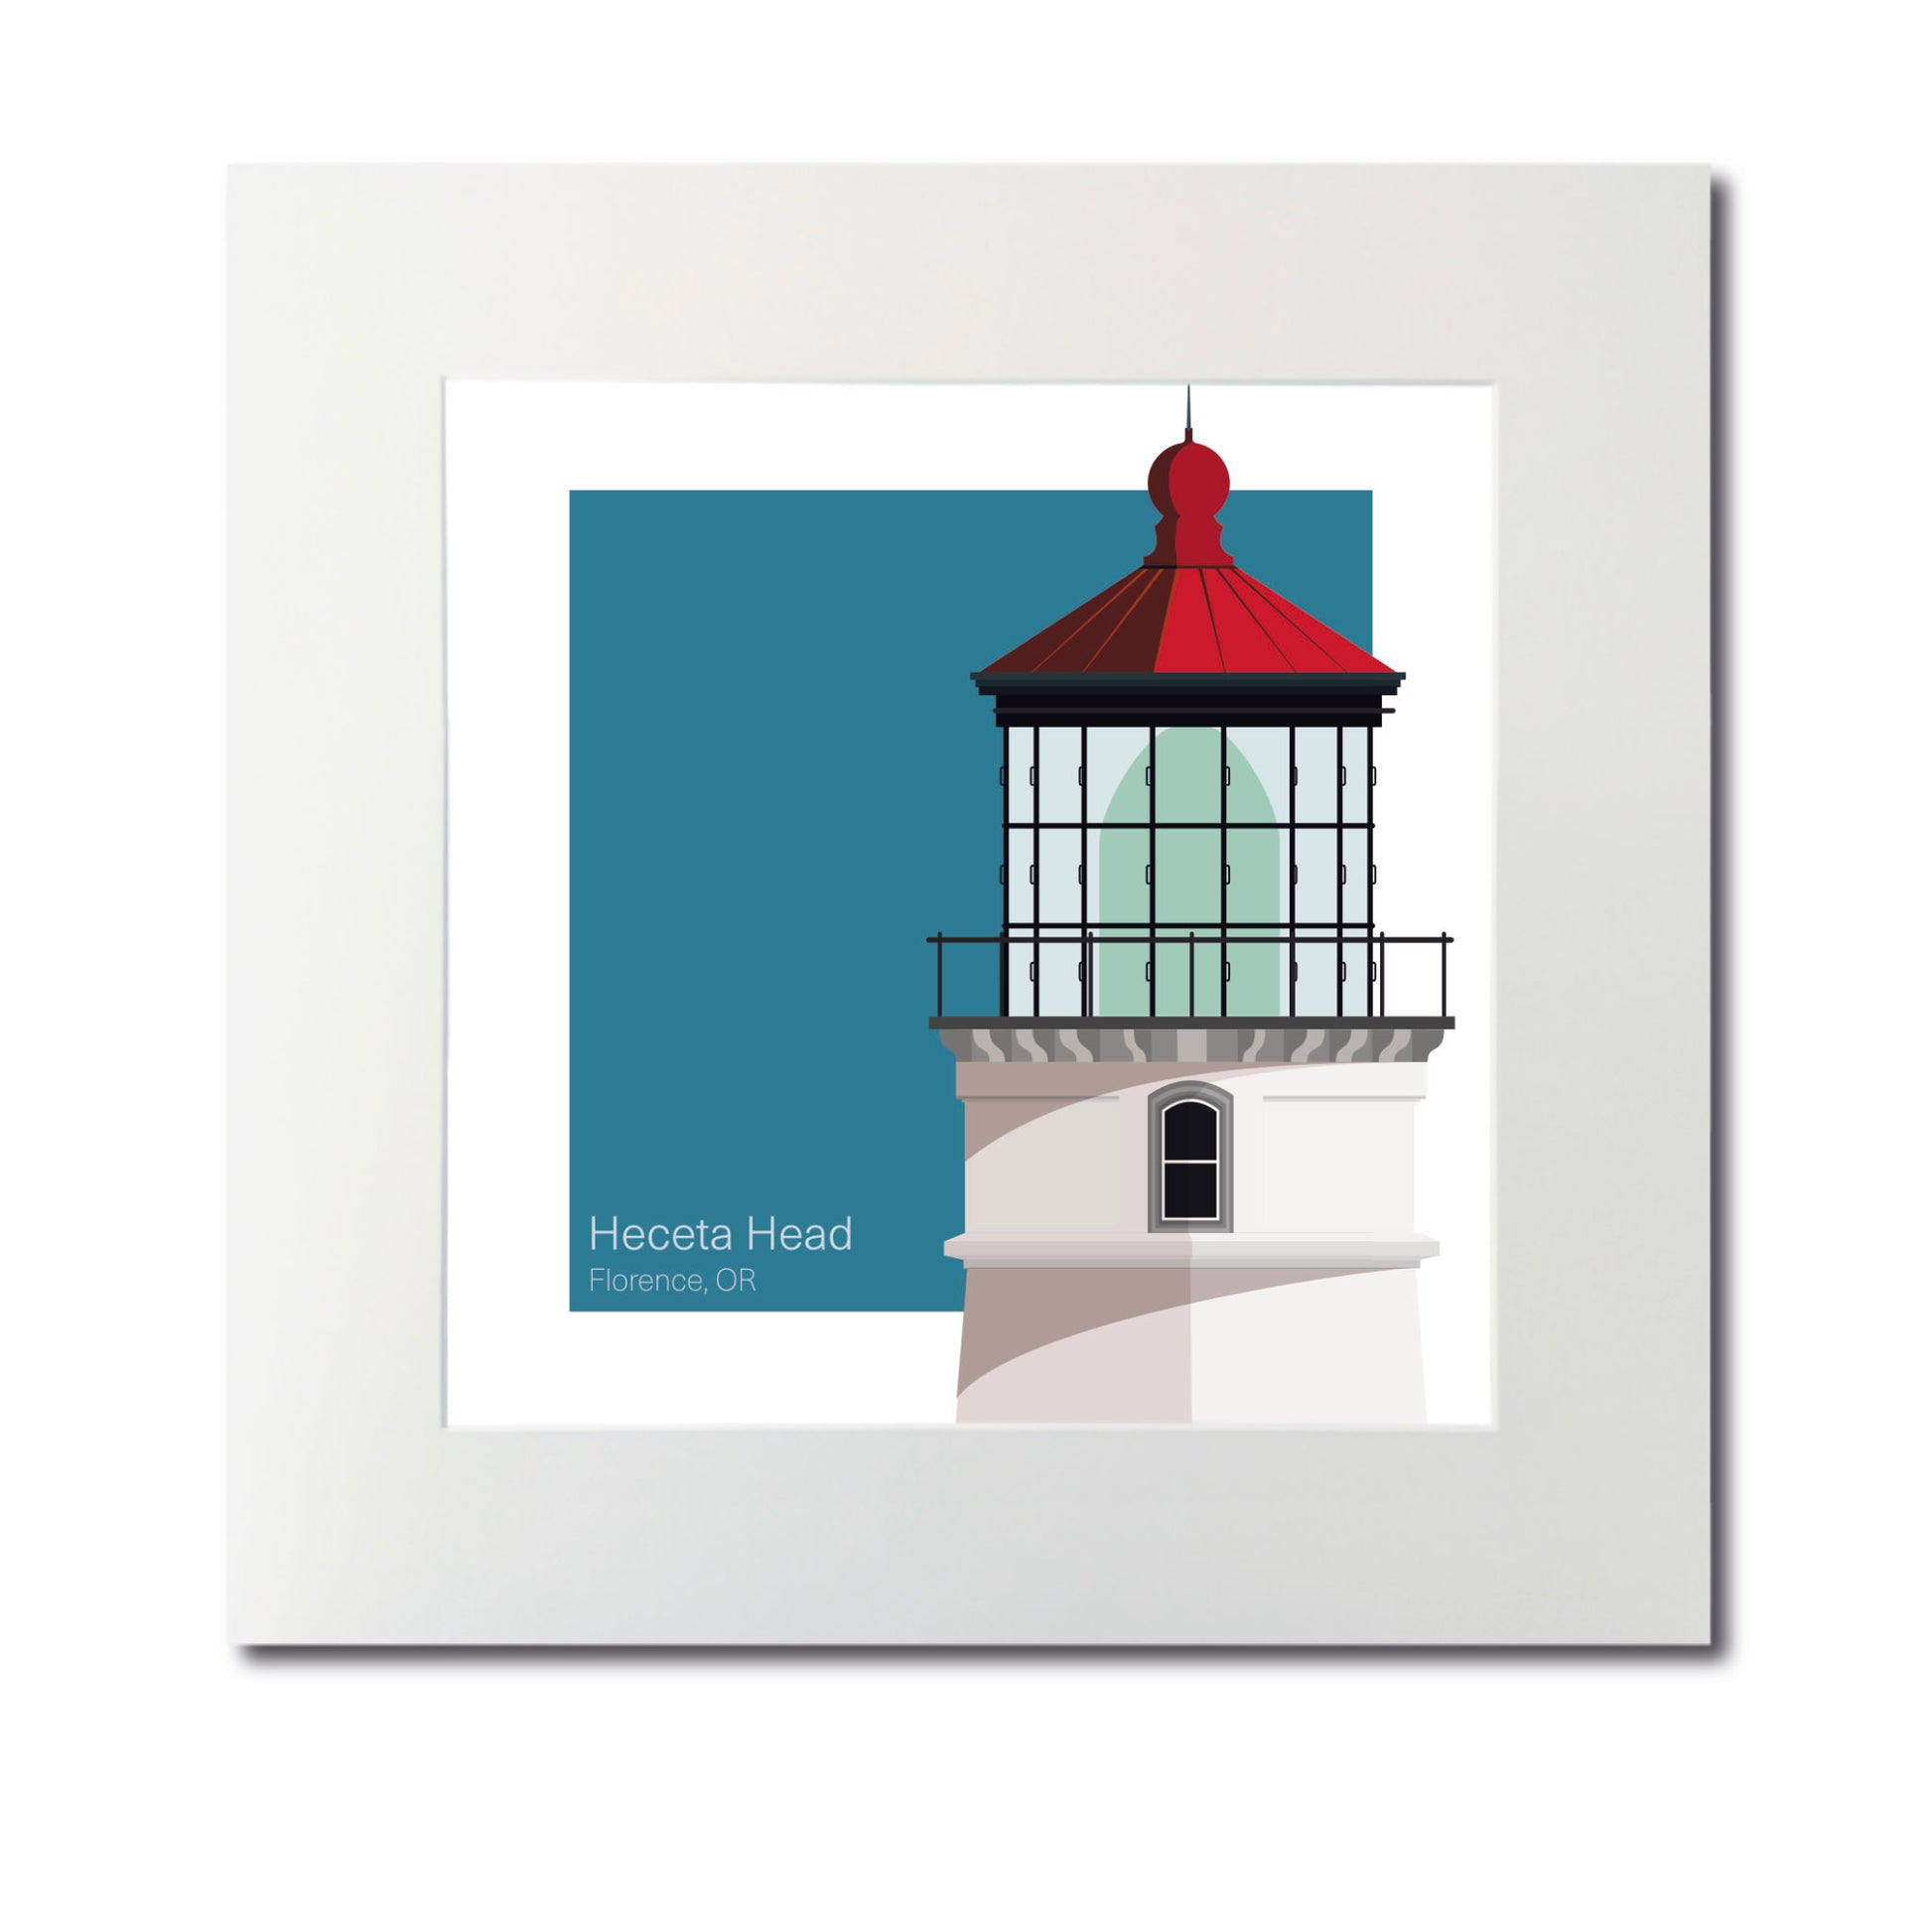 Illustration of the Heceta Head lighthouse, OR, USA. On a white background with aqua blue square as a backdrop., mounted and measuring 12"x12" (30x30cm).